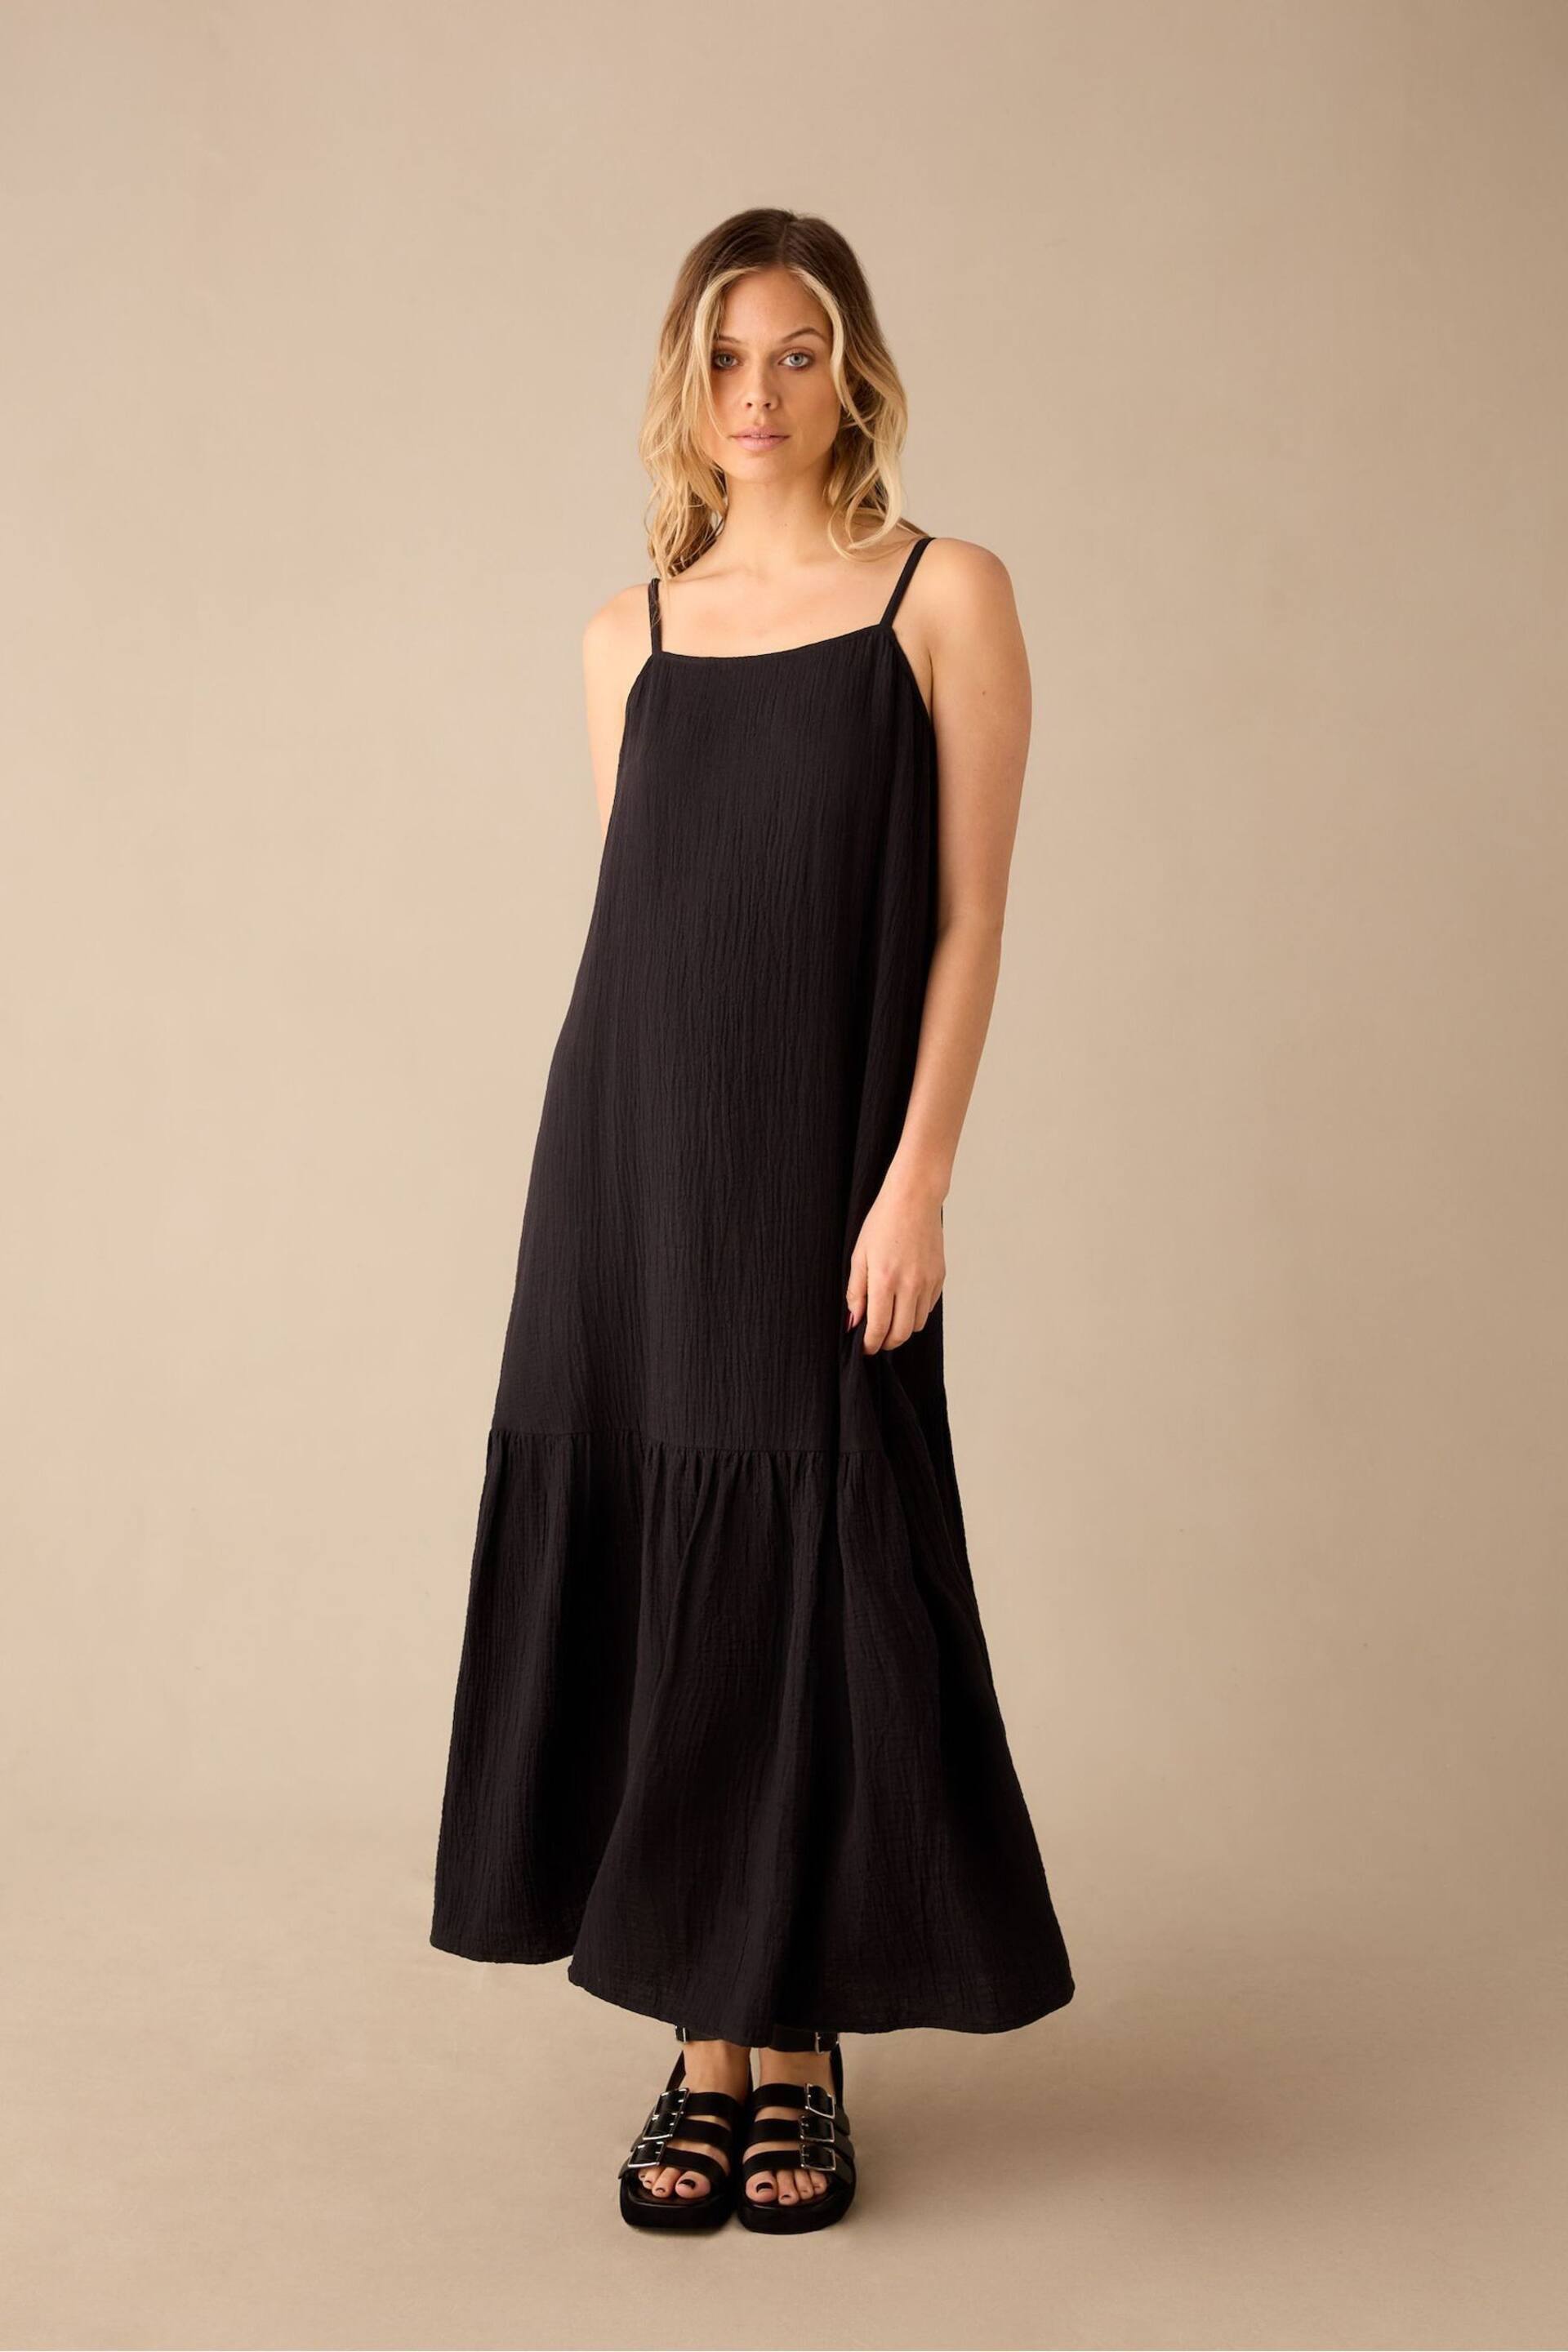 Ro&Zo Black Tiered Hem Strappy Cheesecloth Dress - Image 3 of 5